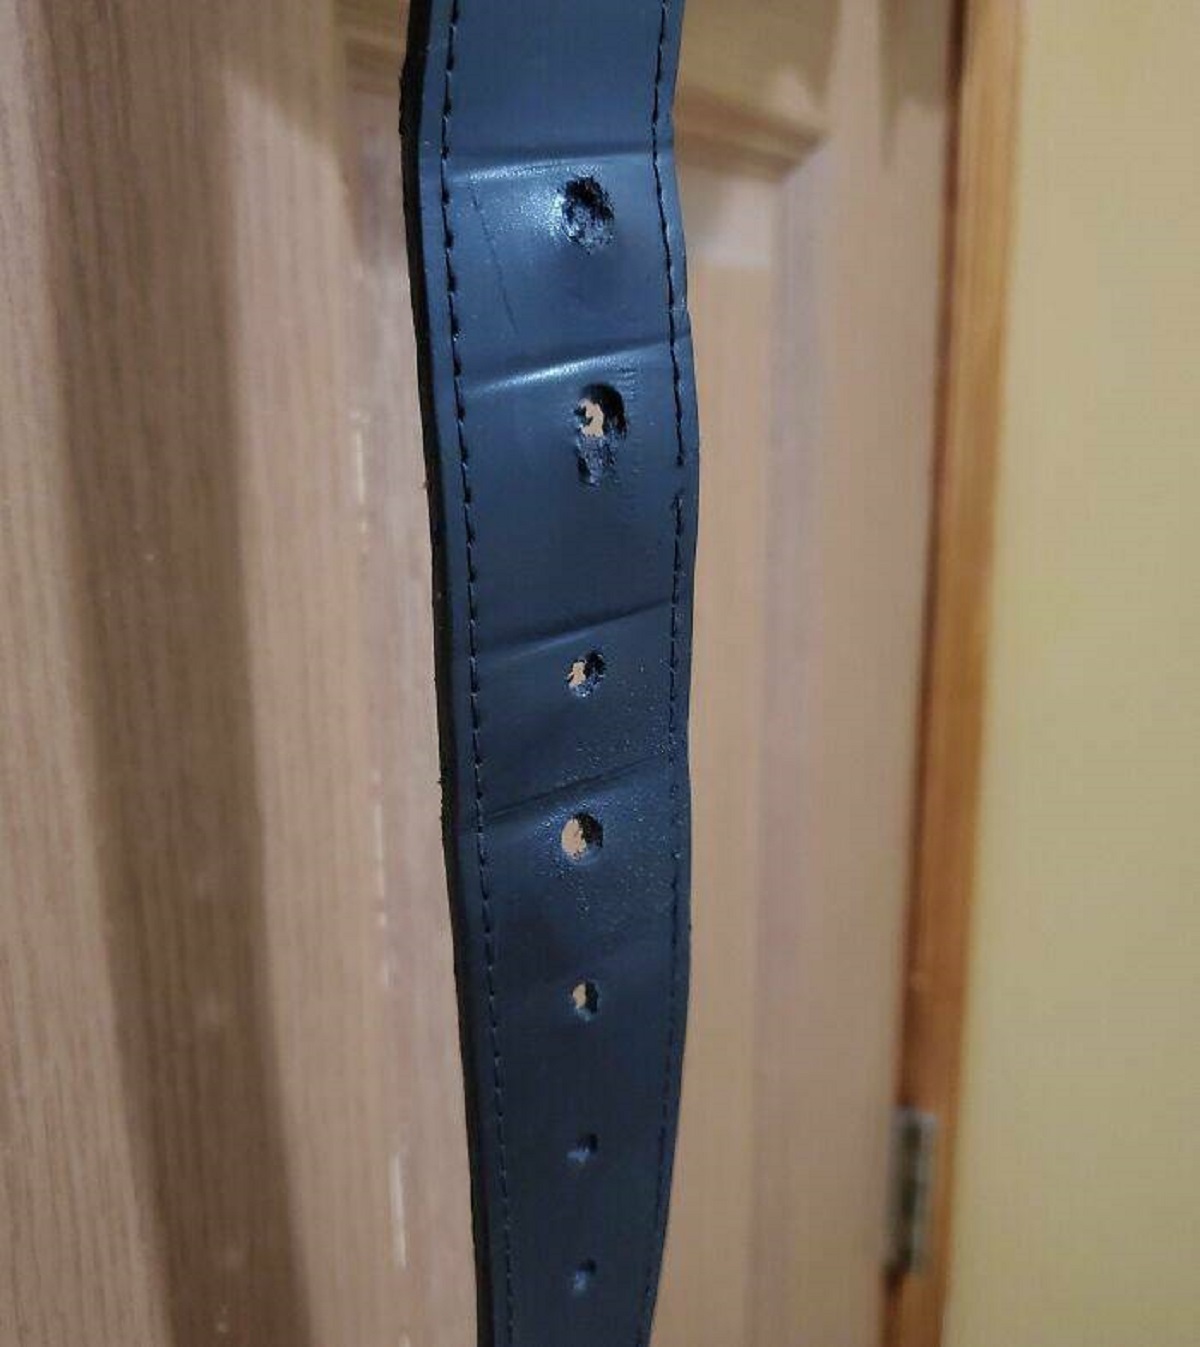 "You Can See My Weight Loss Progress In My Work Belt"